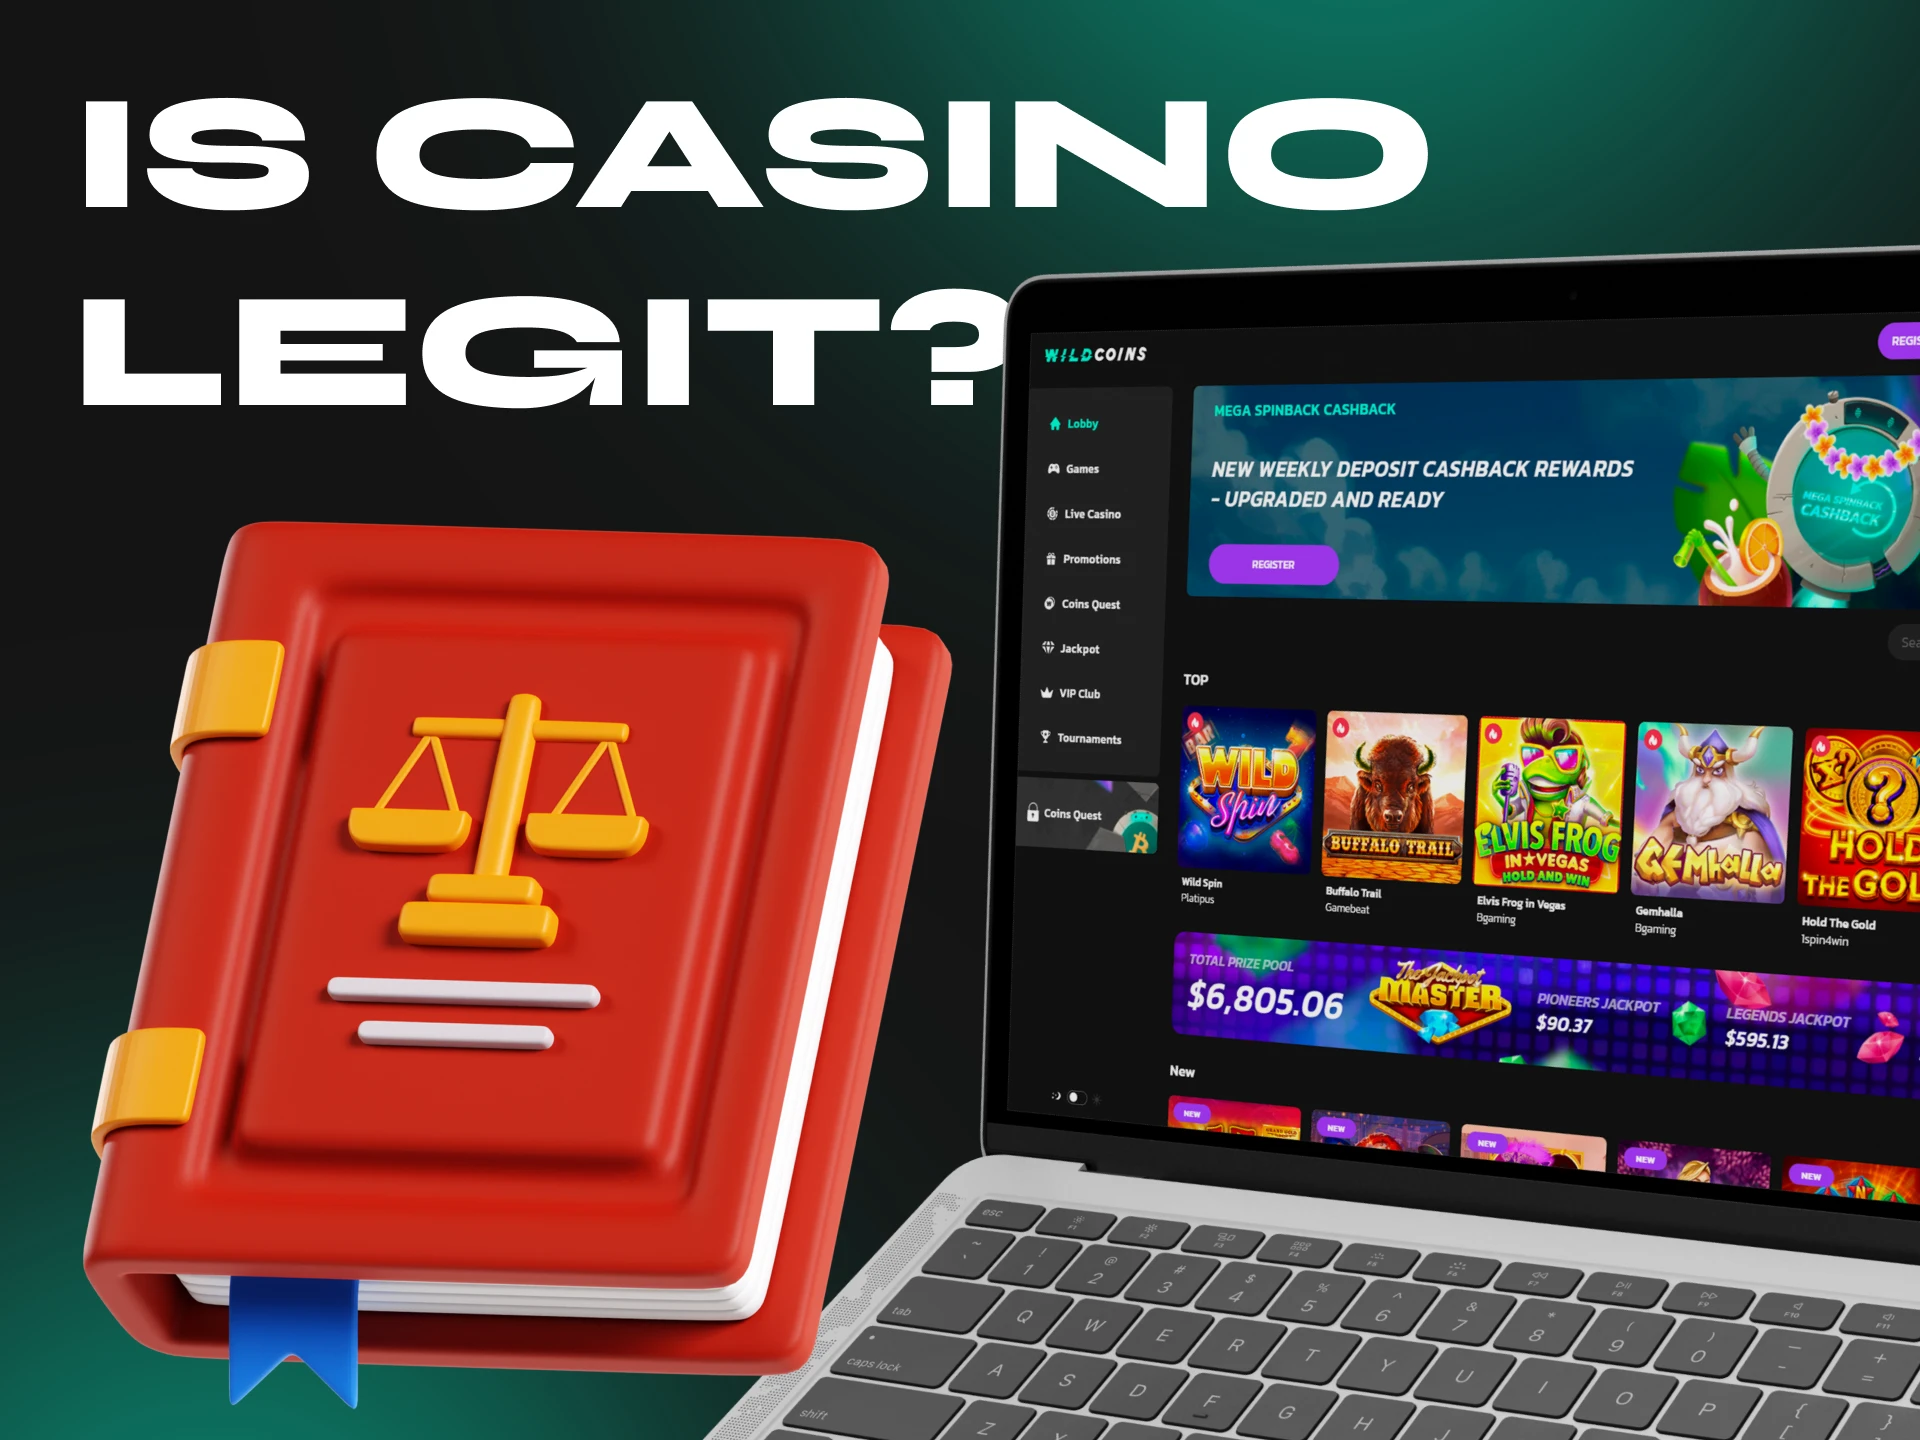 Here are some reasons why Wildcoins is a reputable and legitimate casino.